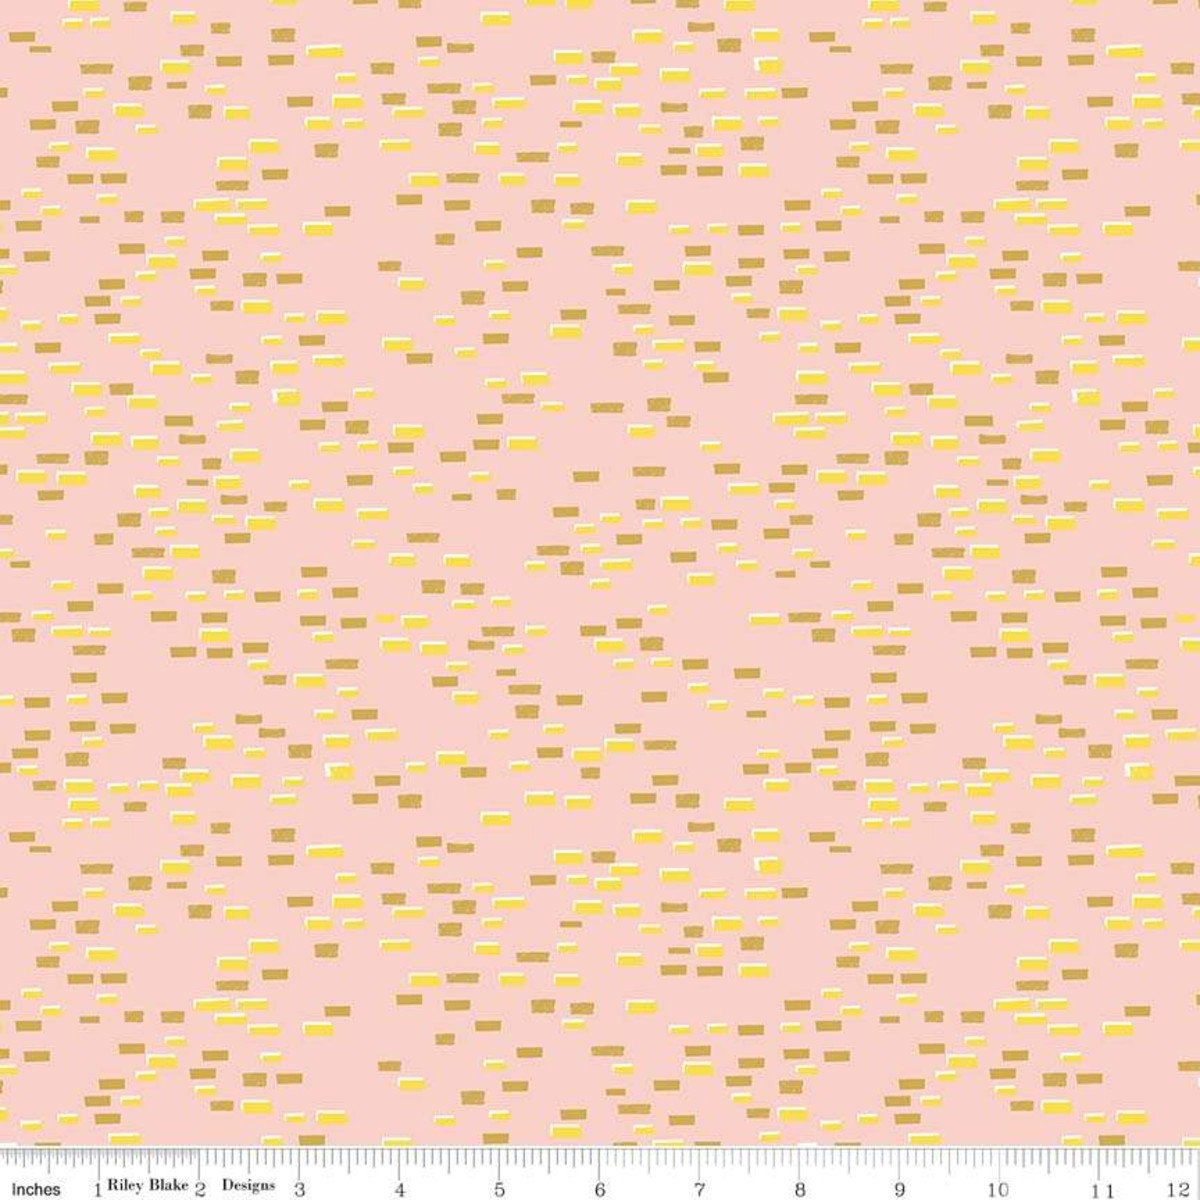 Dorothy's Journey by Jill Howarth Yellow Brick Road Pink C8684-PINK Cotton Woven Fabric